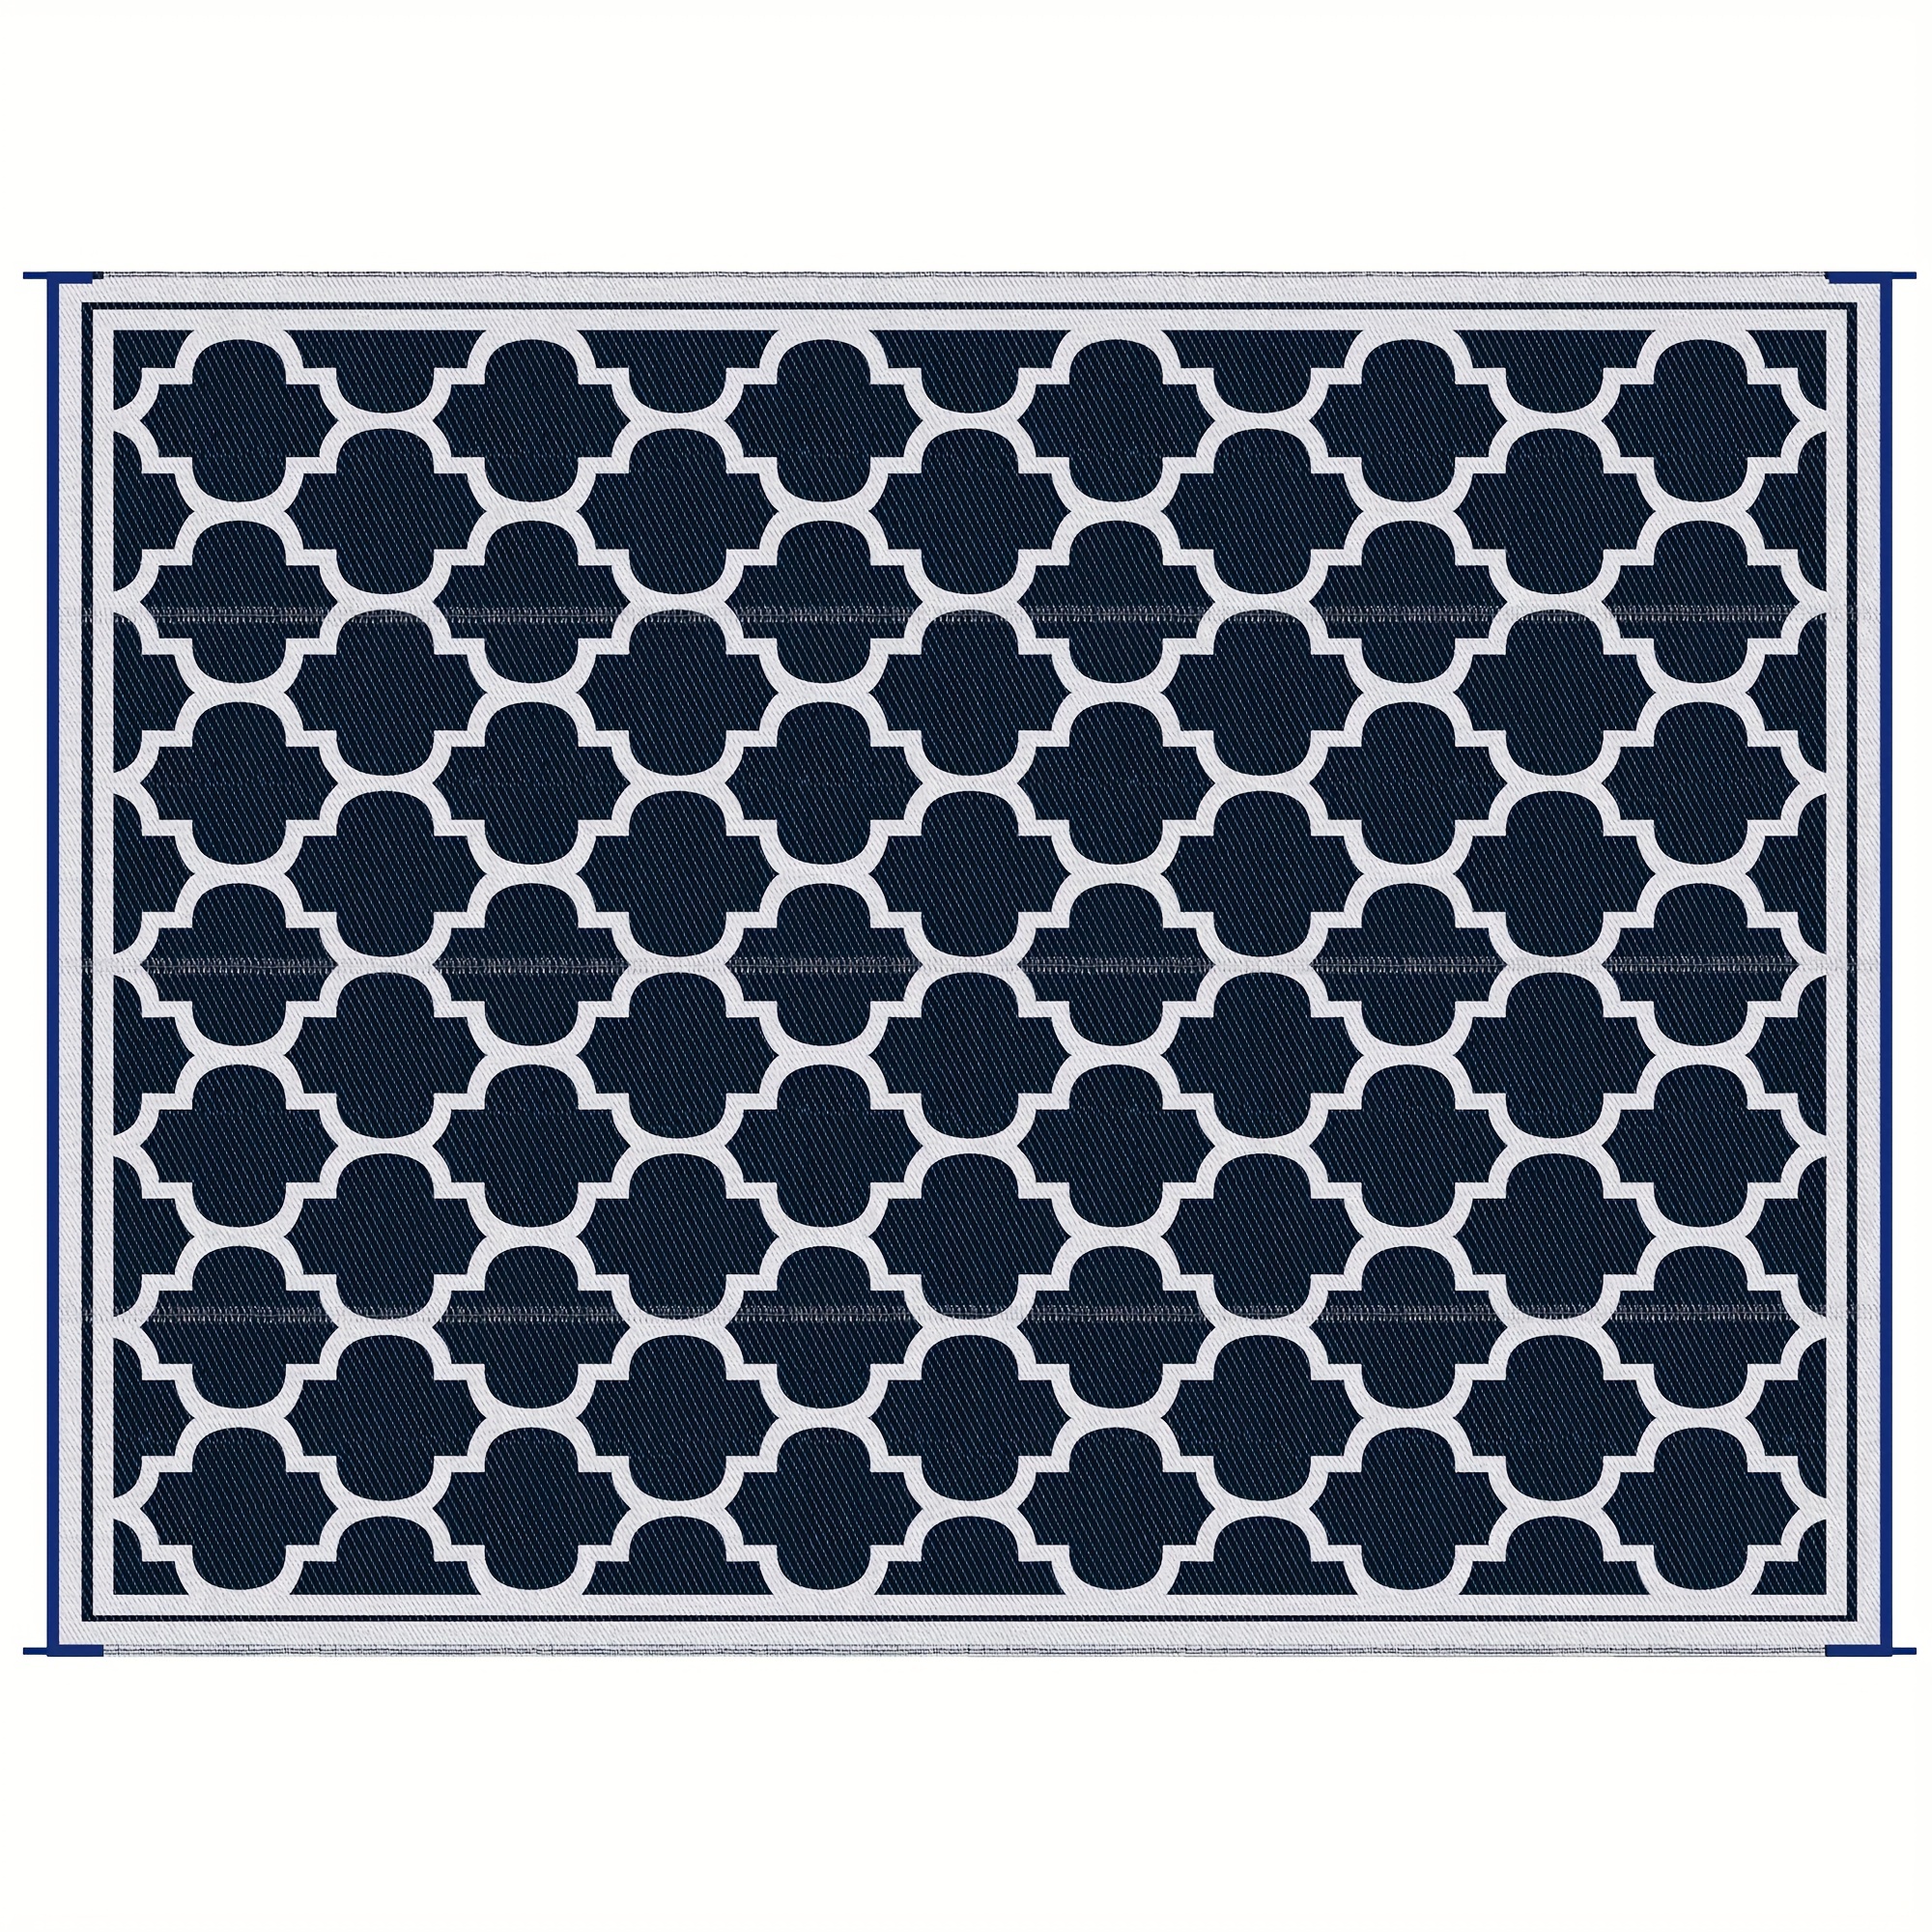 

Outsunny Reversible Outdoor Rug, 9' X 12' Waterproof Plastic Straw Floor Mat, Portable Rv Camping Carpet, Large Floor Mat For Backyard, Deck, Picnic, Beach, Blue & White